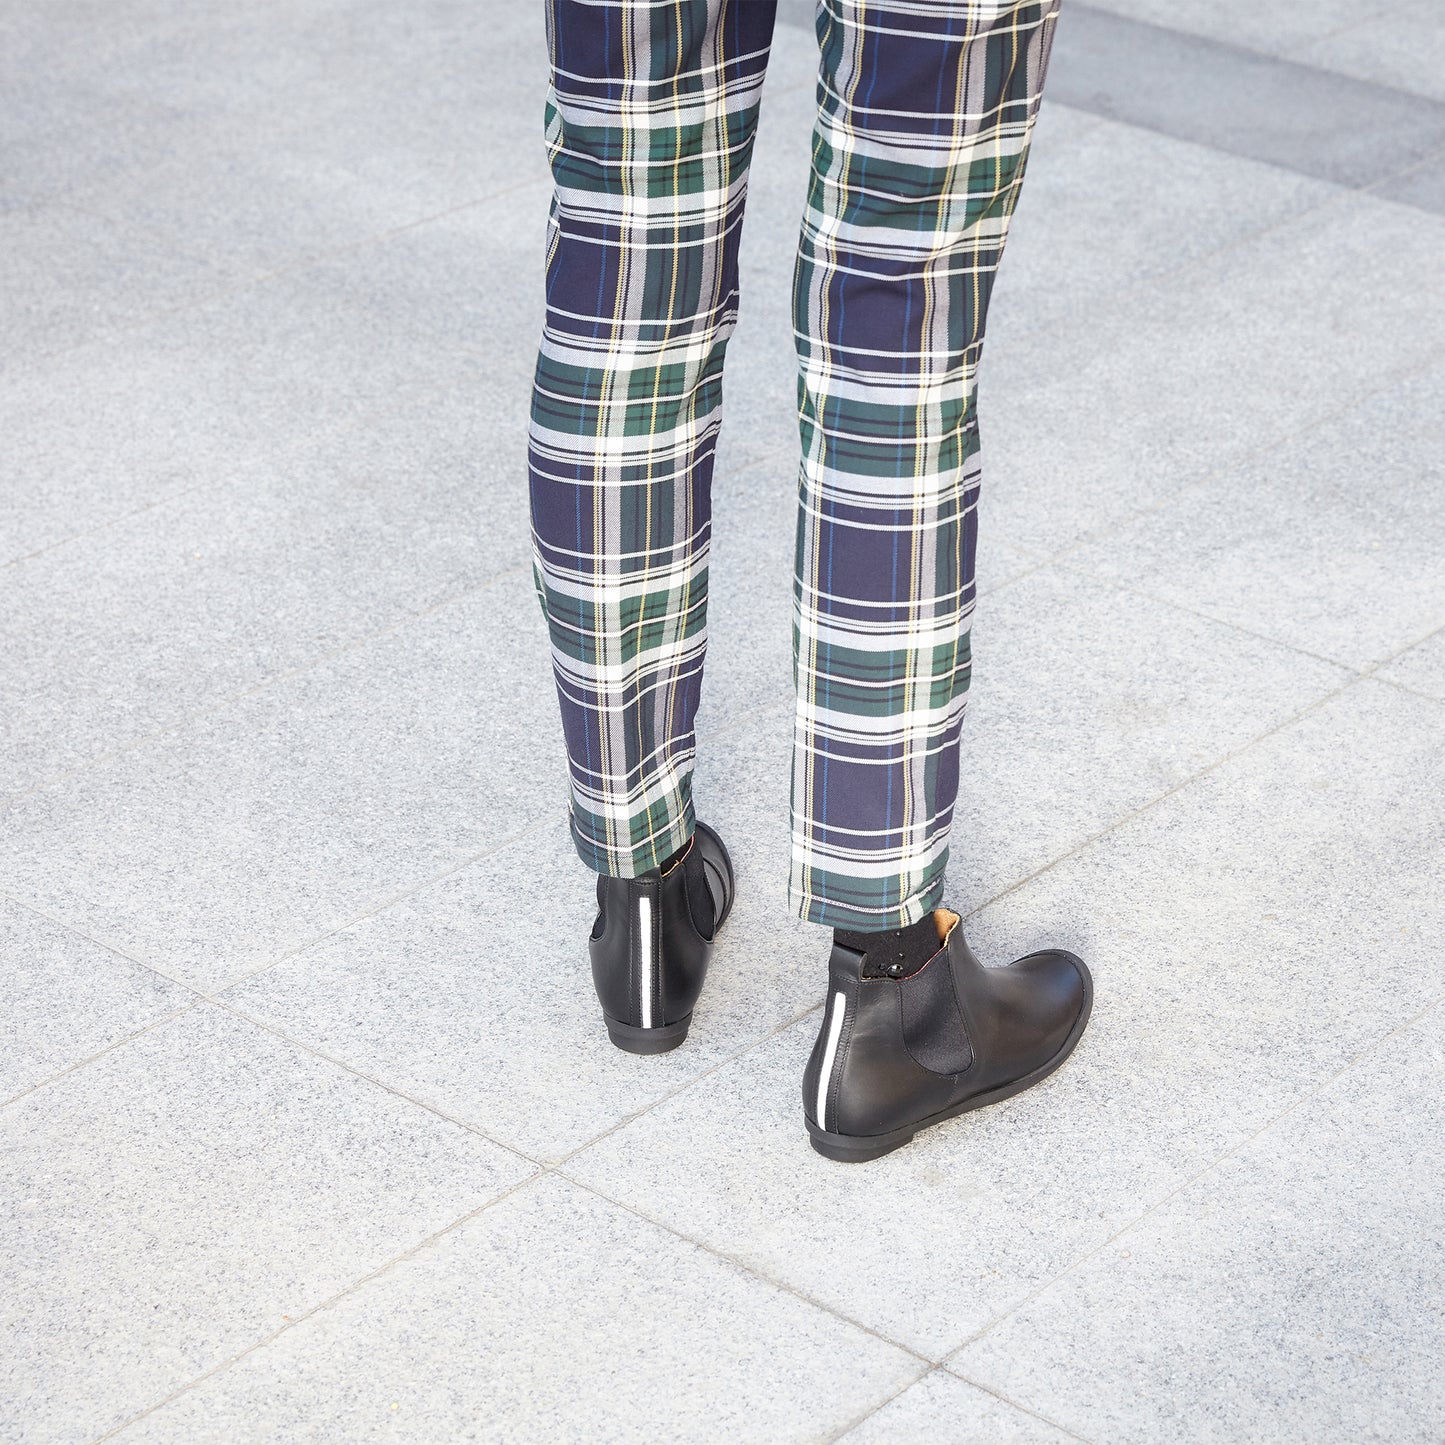 GEORGE Smoke | Cycle Friendly Chelsea Boot | Tracey Neuls